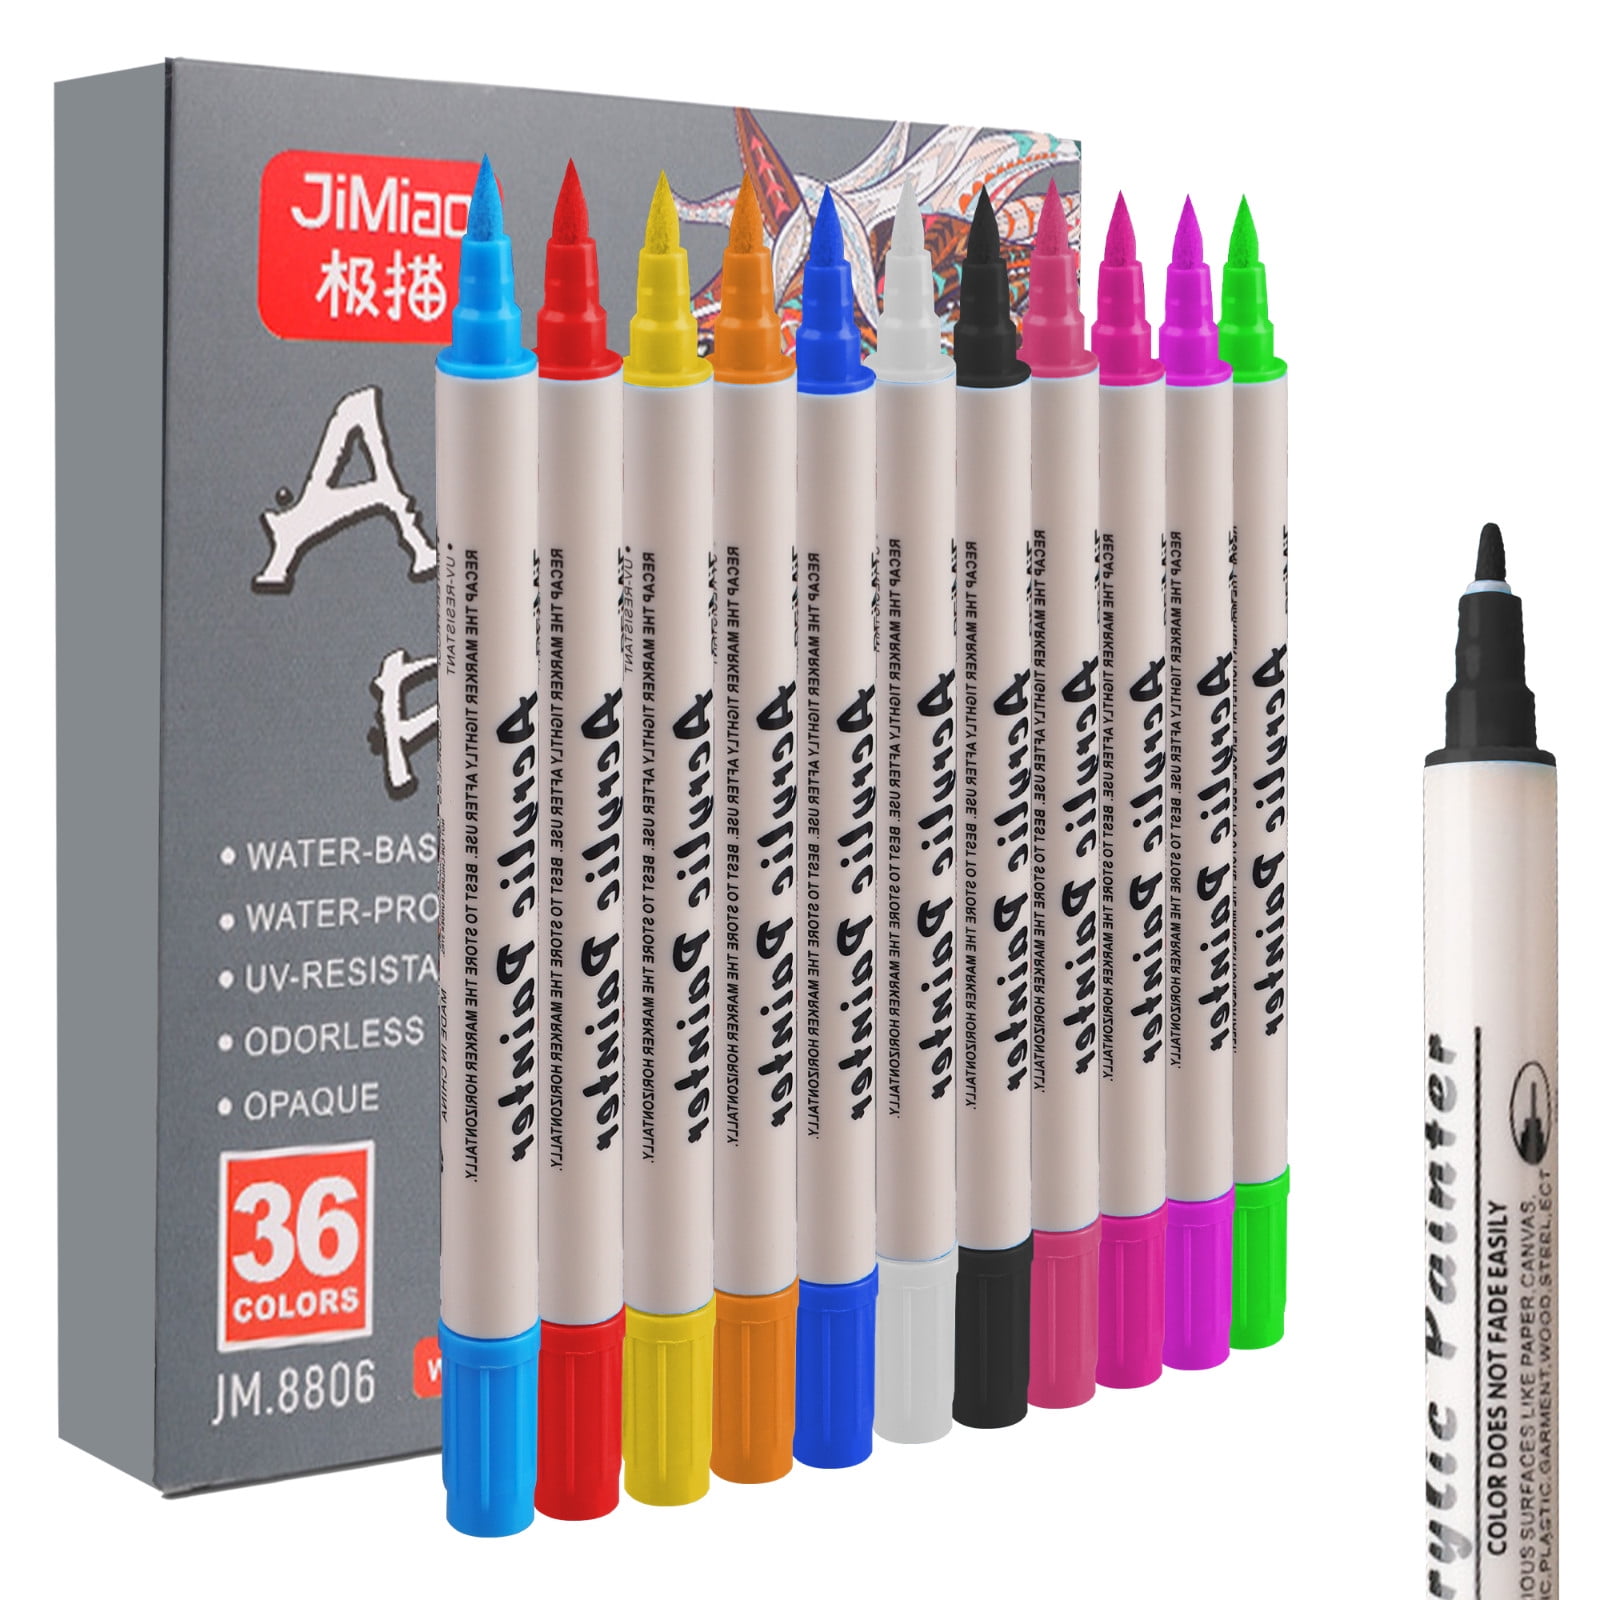 Arrtx 54 Colors Acrylic Paint Pens for Rock Painting, Extra Brush Tip,  Water Based Paint Markers for Stone, Glass, Easter Egg, Wood and Fabric